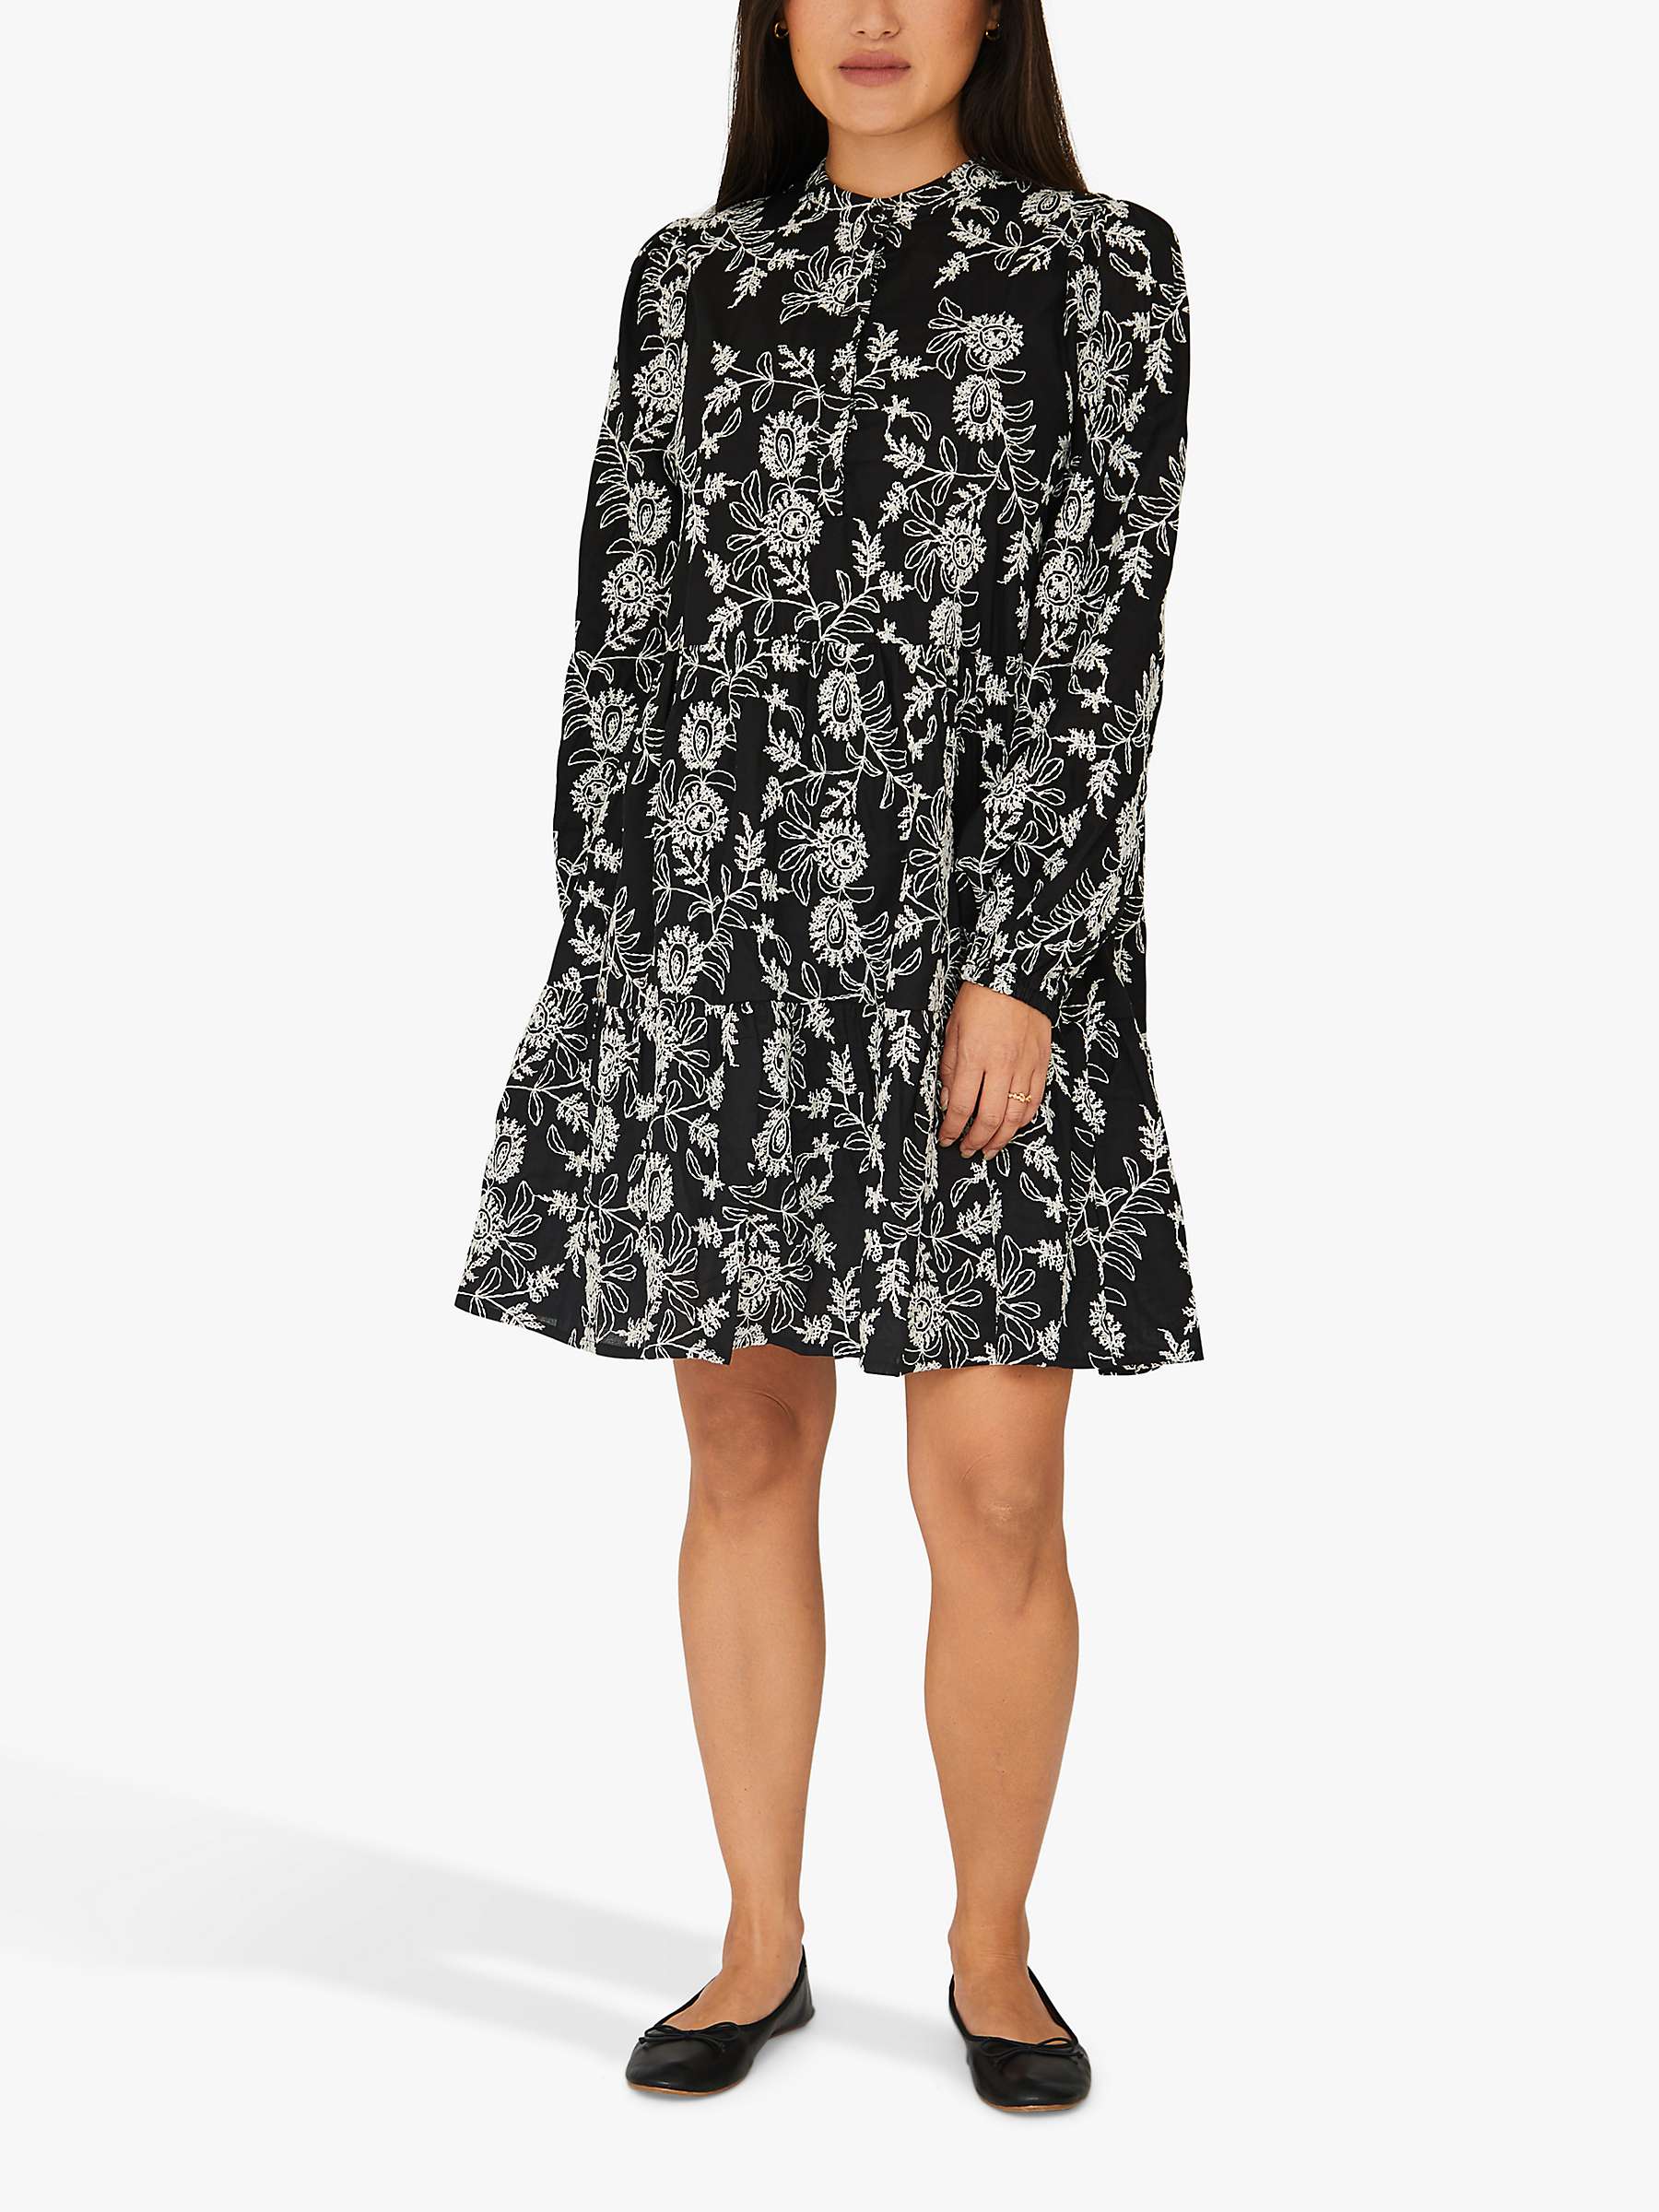 Buy A-VIEW Embroidered Dress, Black/Off White Online at johnlewis.com